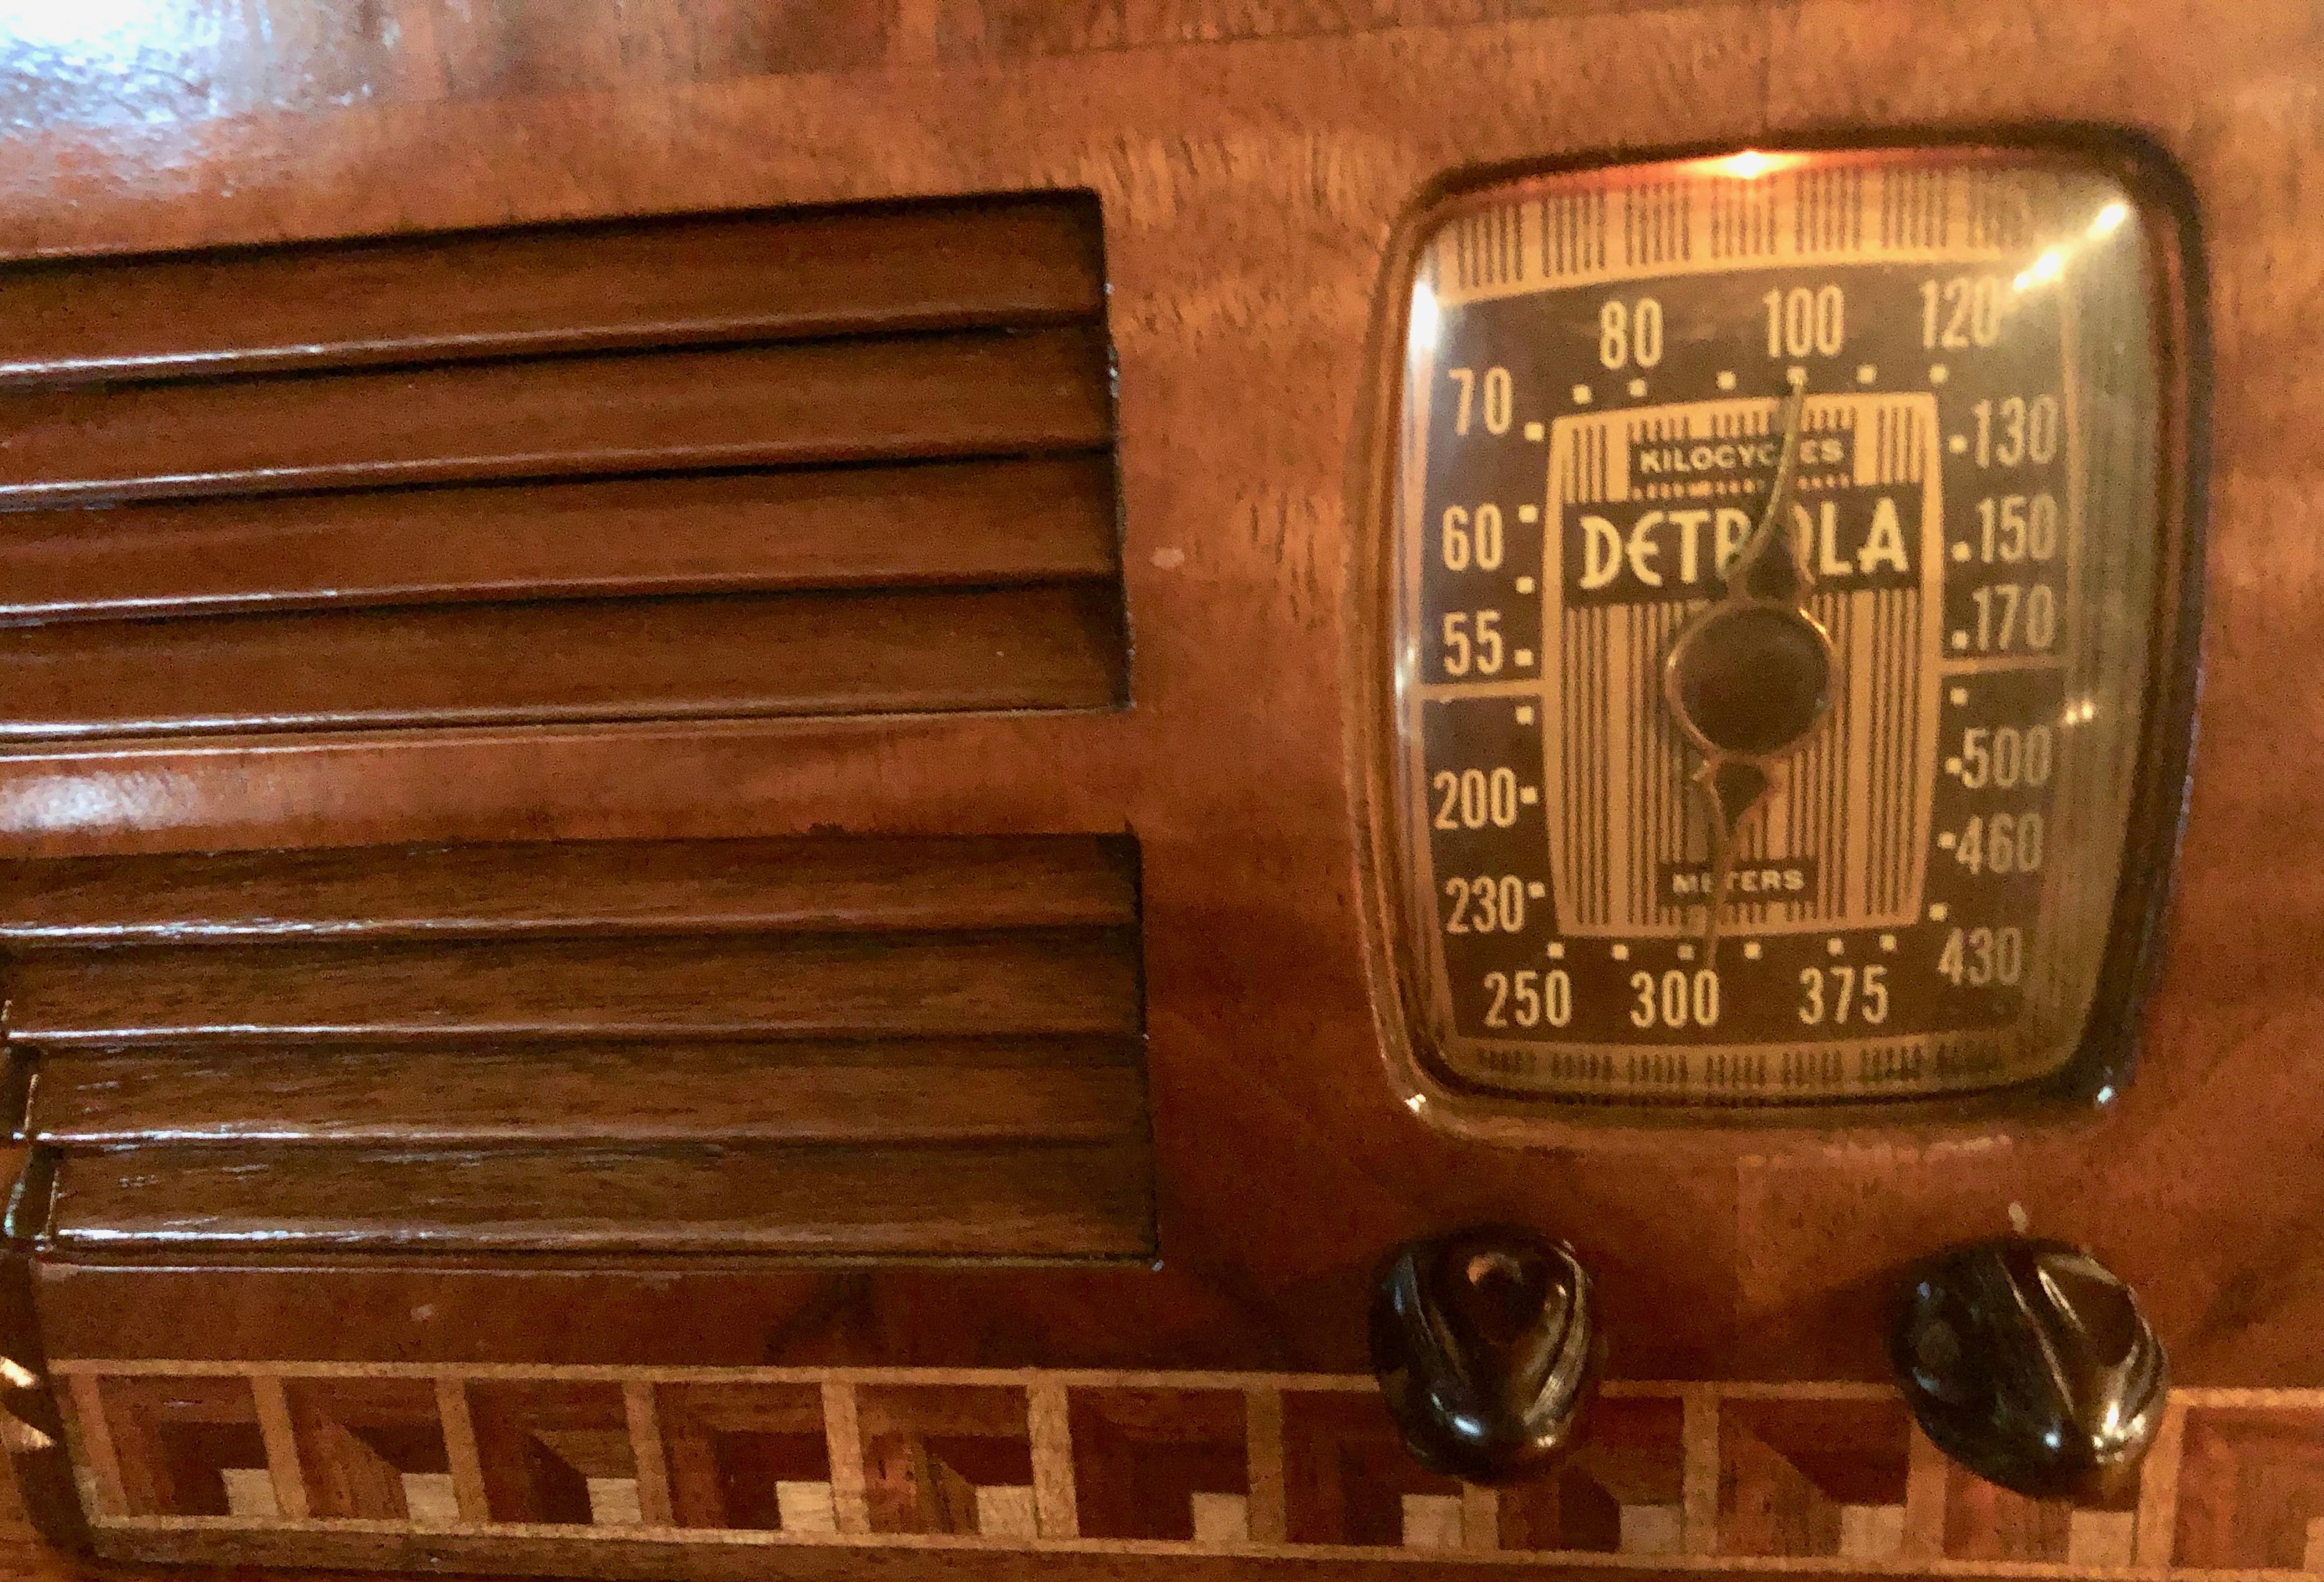 1939 Detrola model 2811, rare fancy wood restored Bluetooth tube radio, from Detroit, Michigan. This small but very loud high end radio has been completely restored. Beautiful wood, solid walnut with marquetry all along the front panel, all original